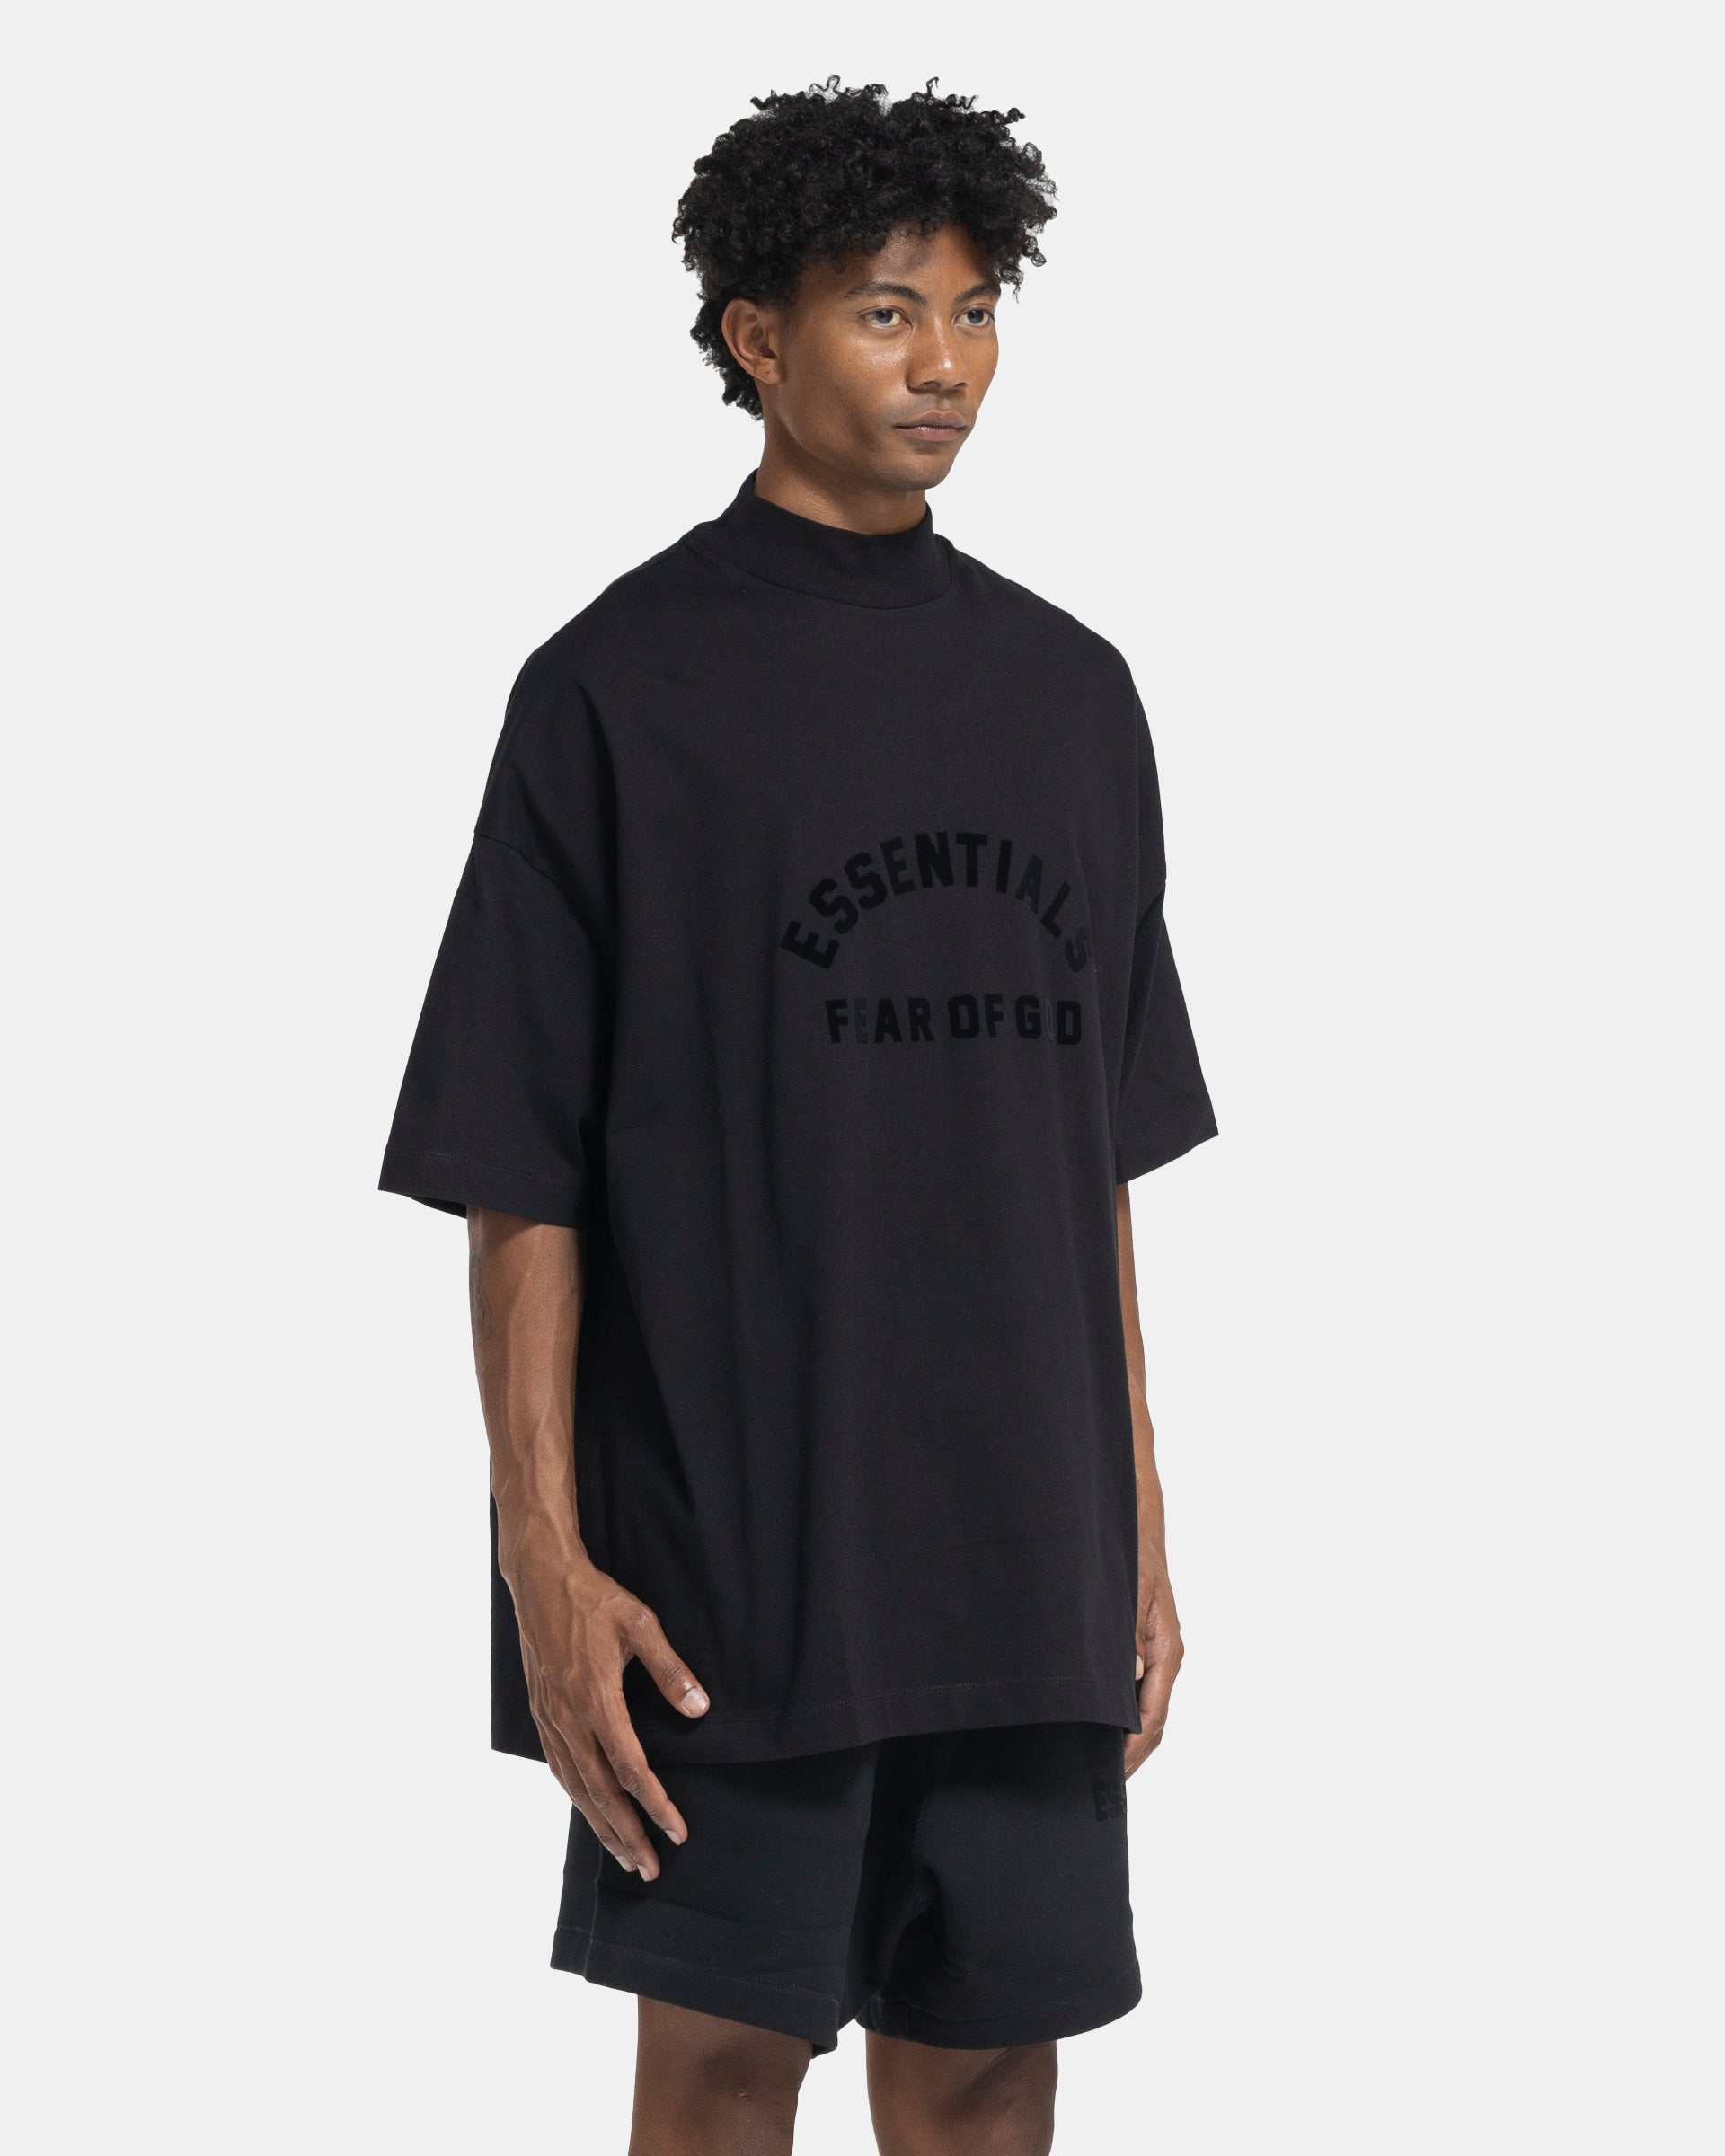 Fear of God Essentials SS22 Collection